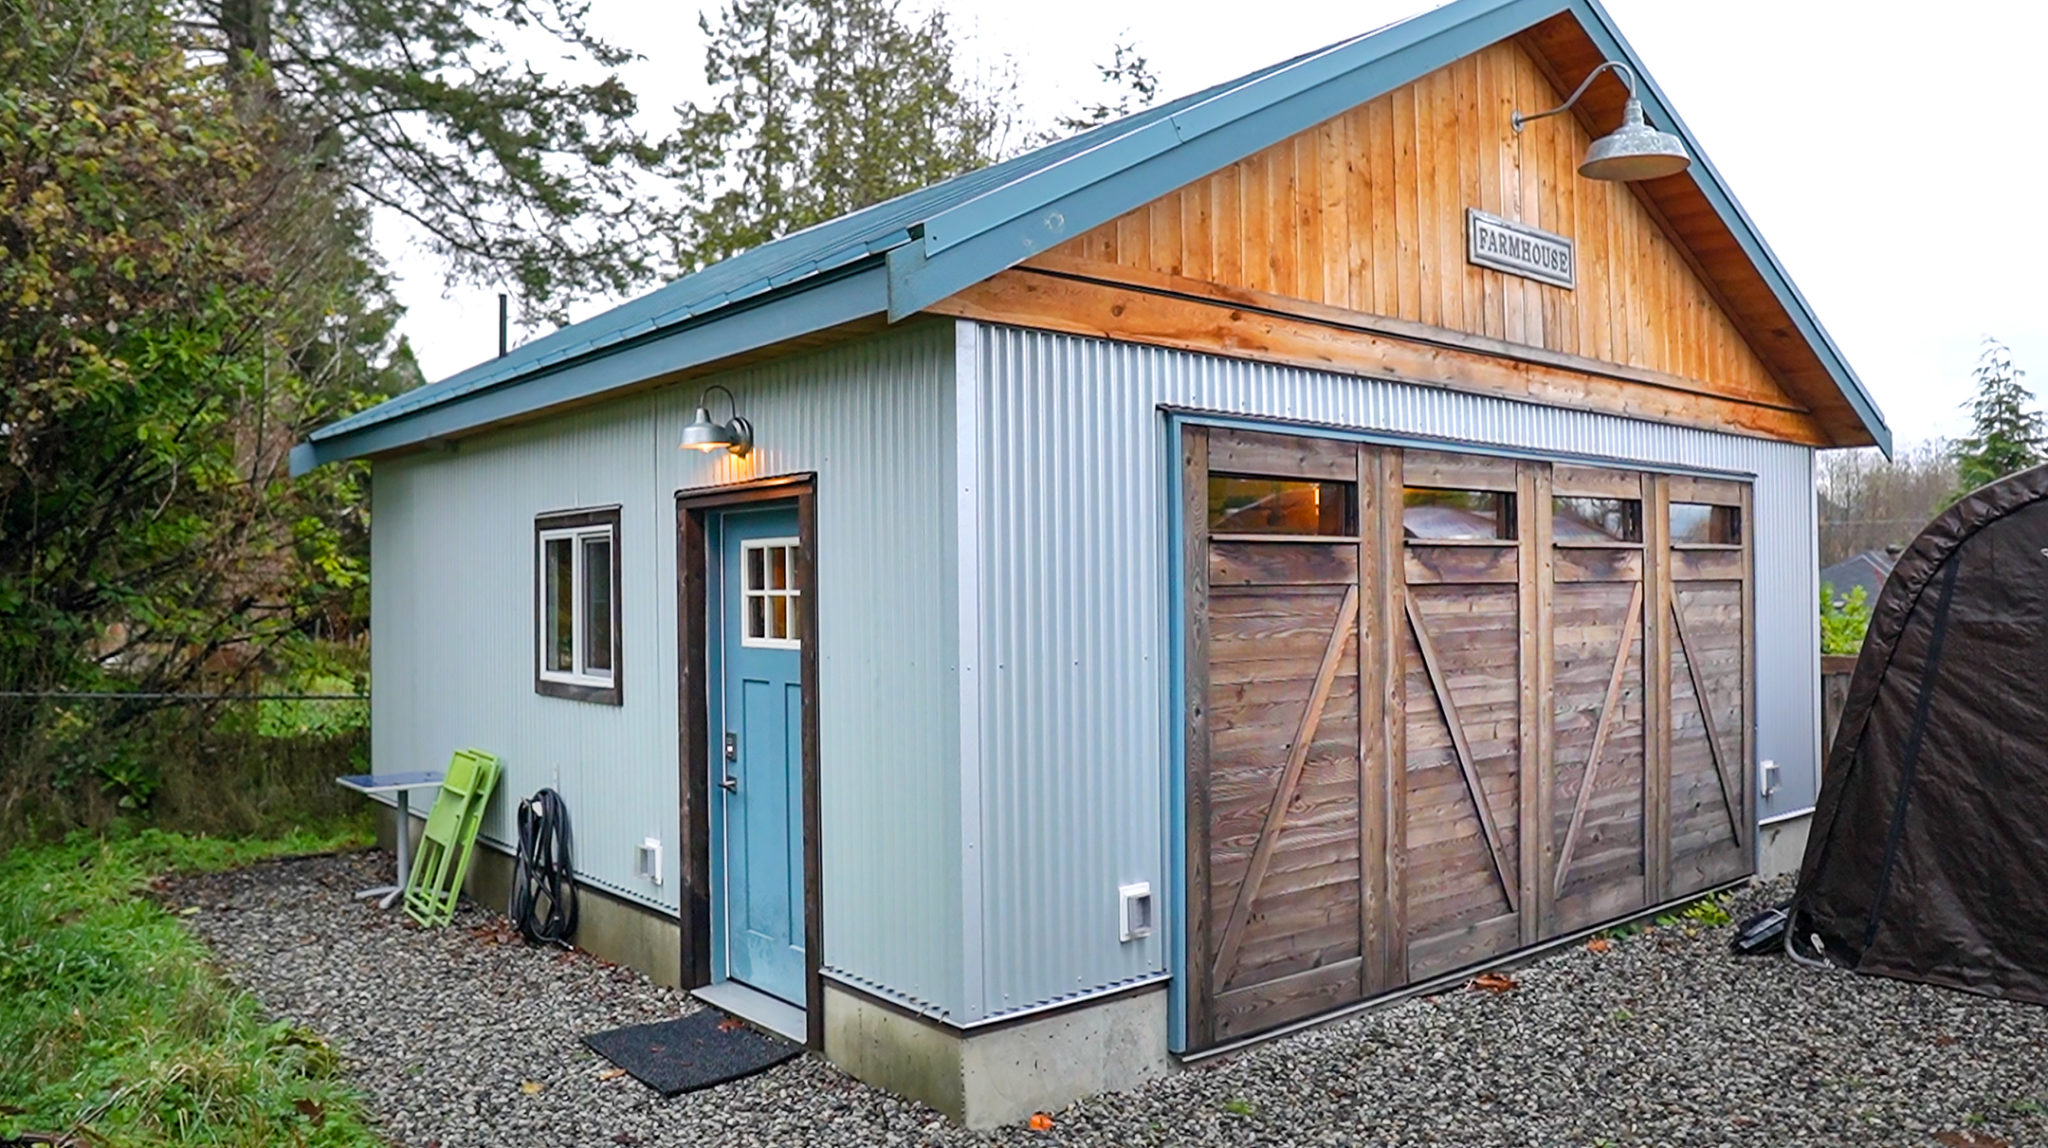 Garage To Tiny Home Conversion 1 2048x1148 